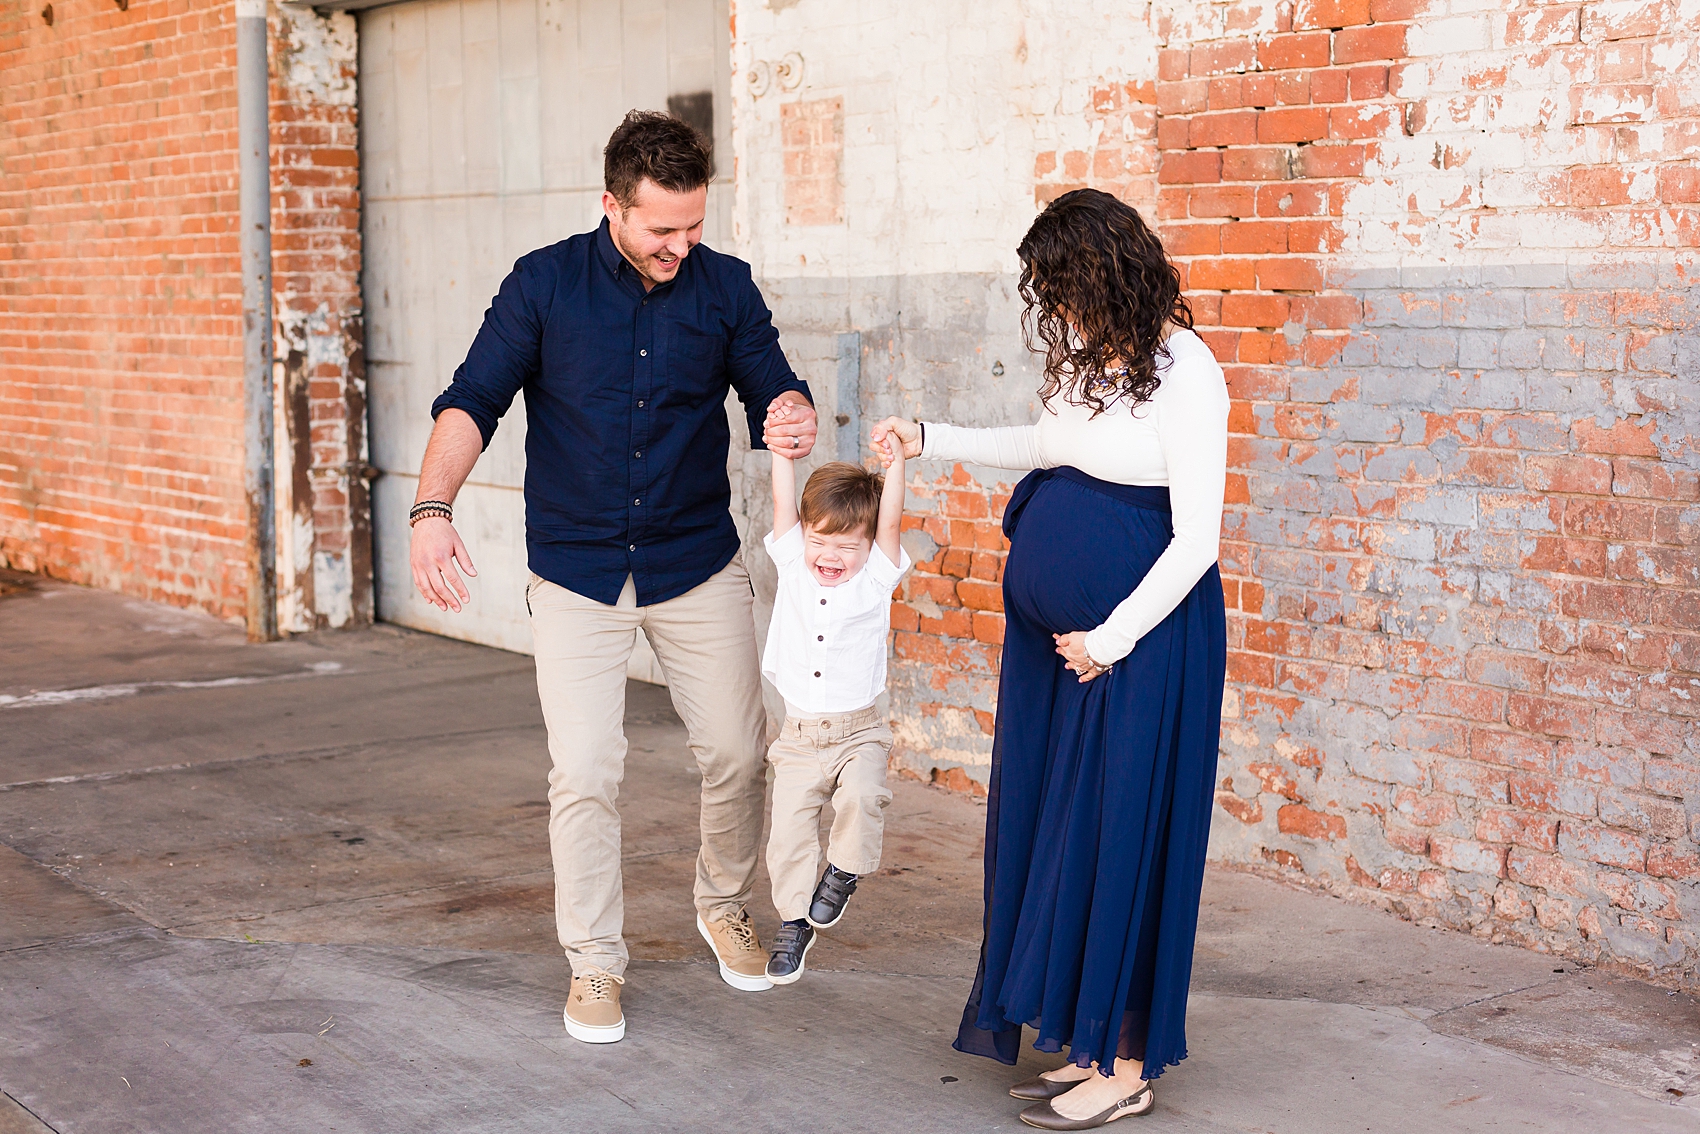 Leah Hope Photography | Downtown Phoenix Arizona Urban Warehouse Maternity Family Pictures